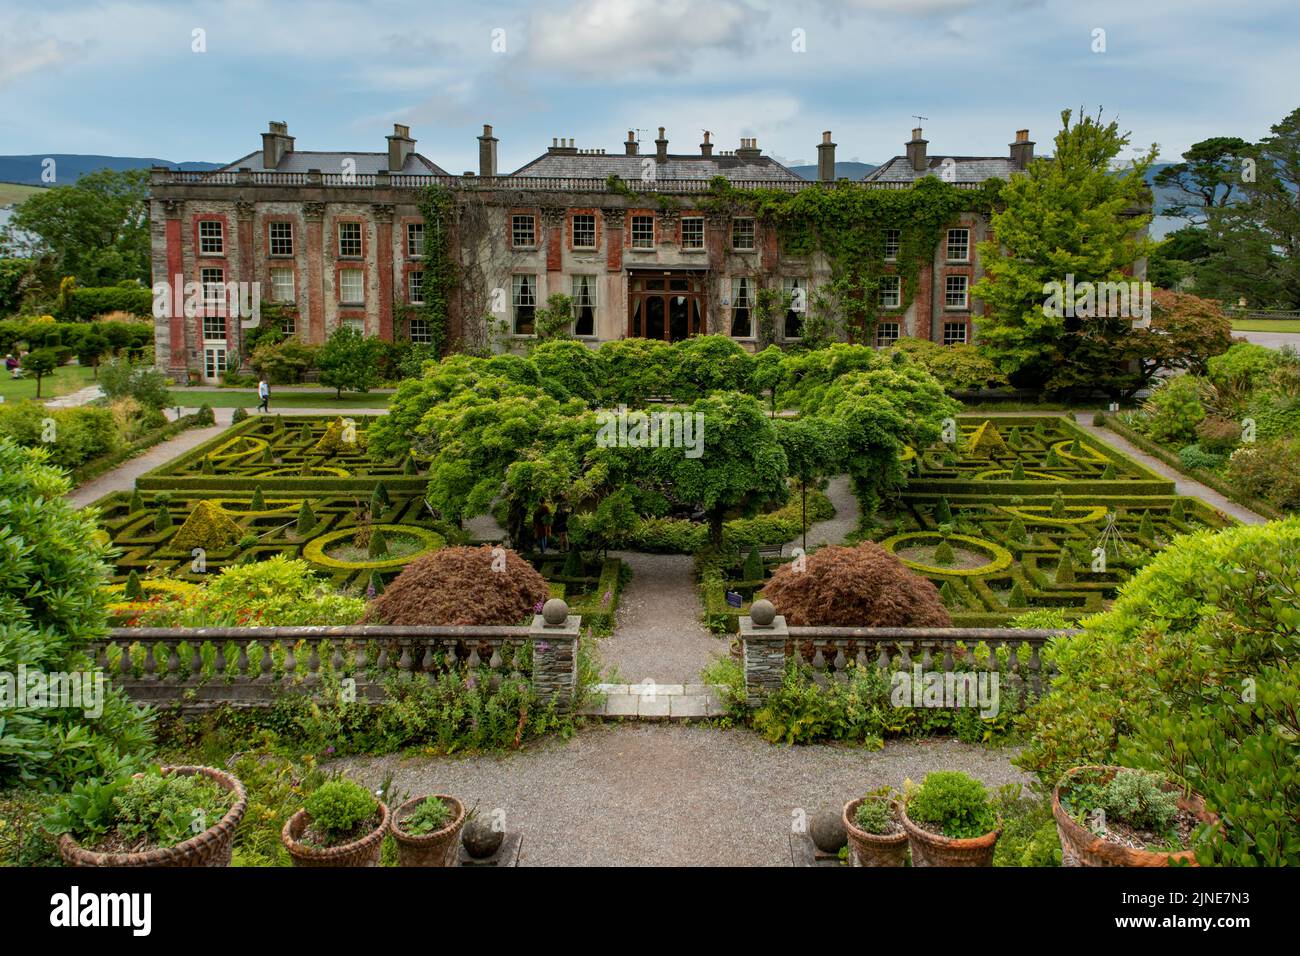 Bantry House and Gardens, Bantry, Co. Cork, Irland Stockfoto